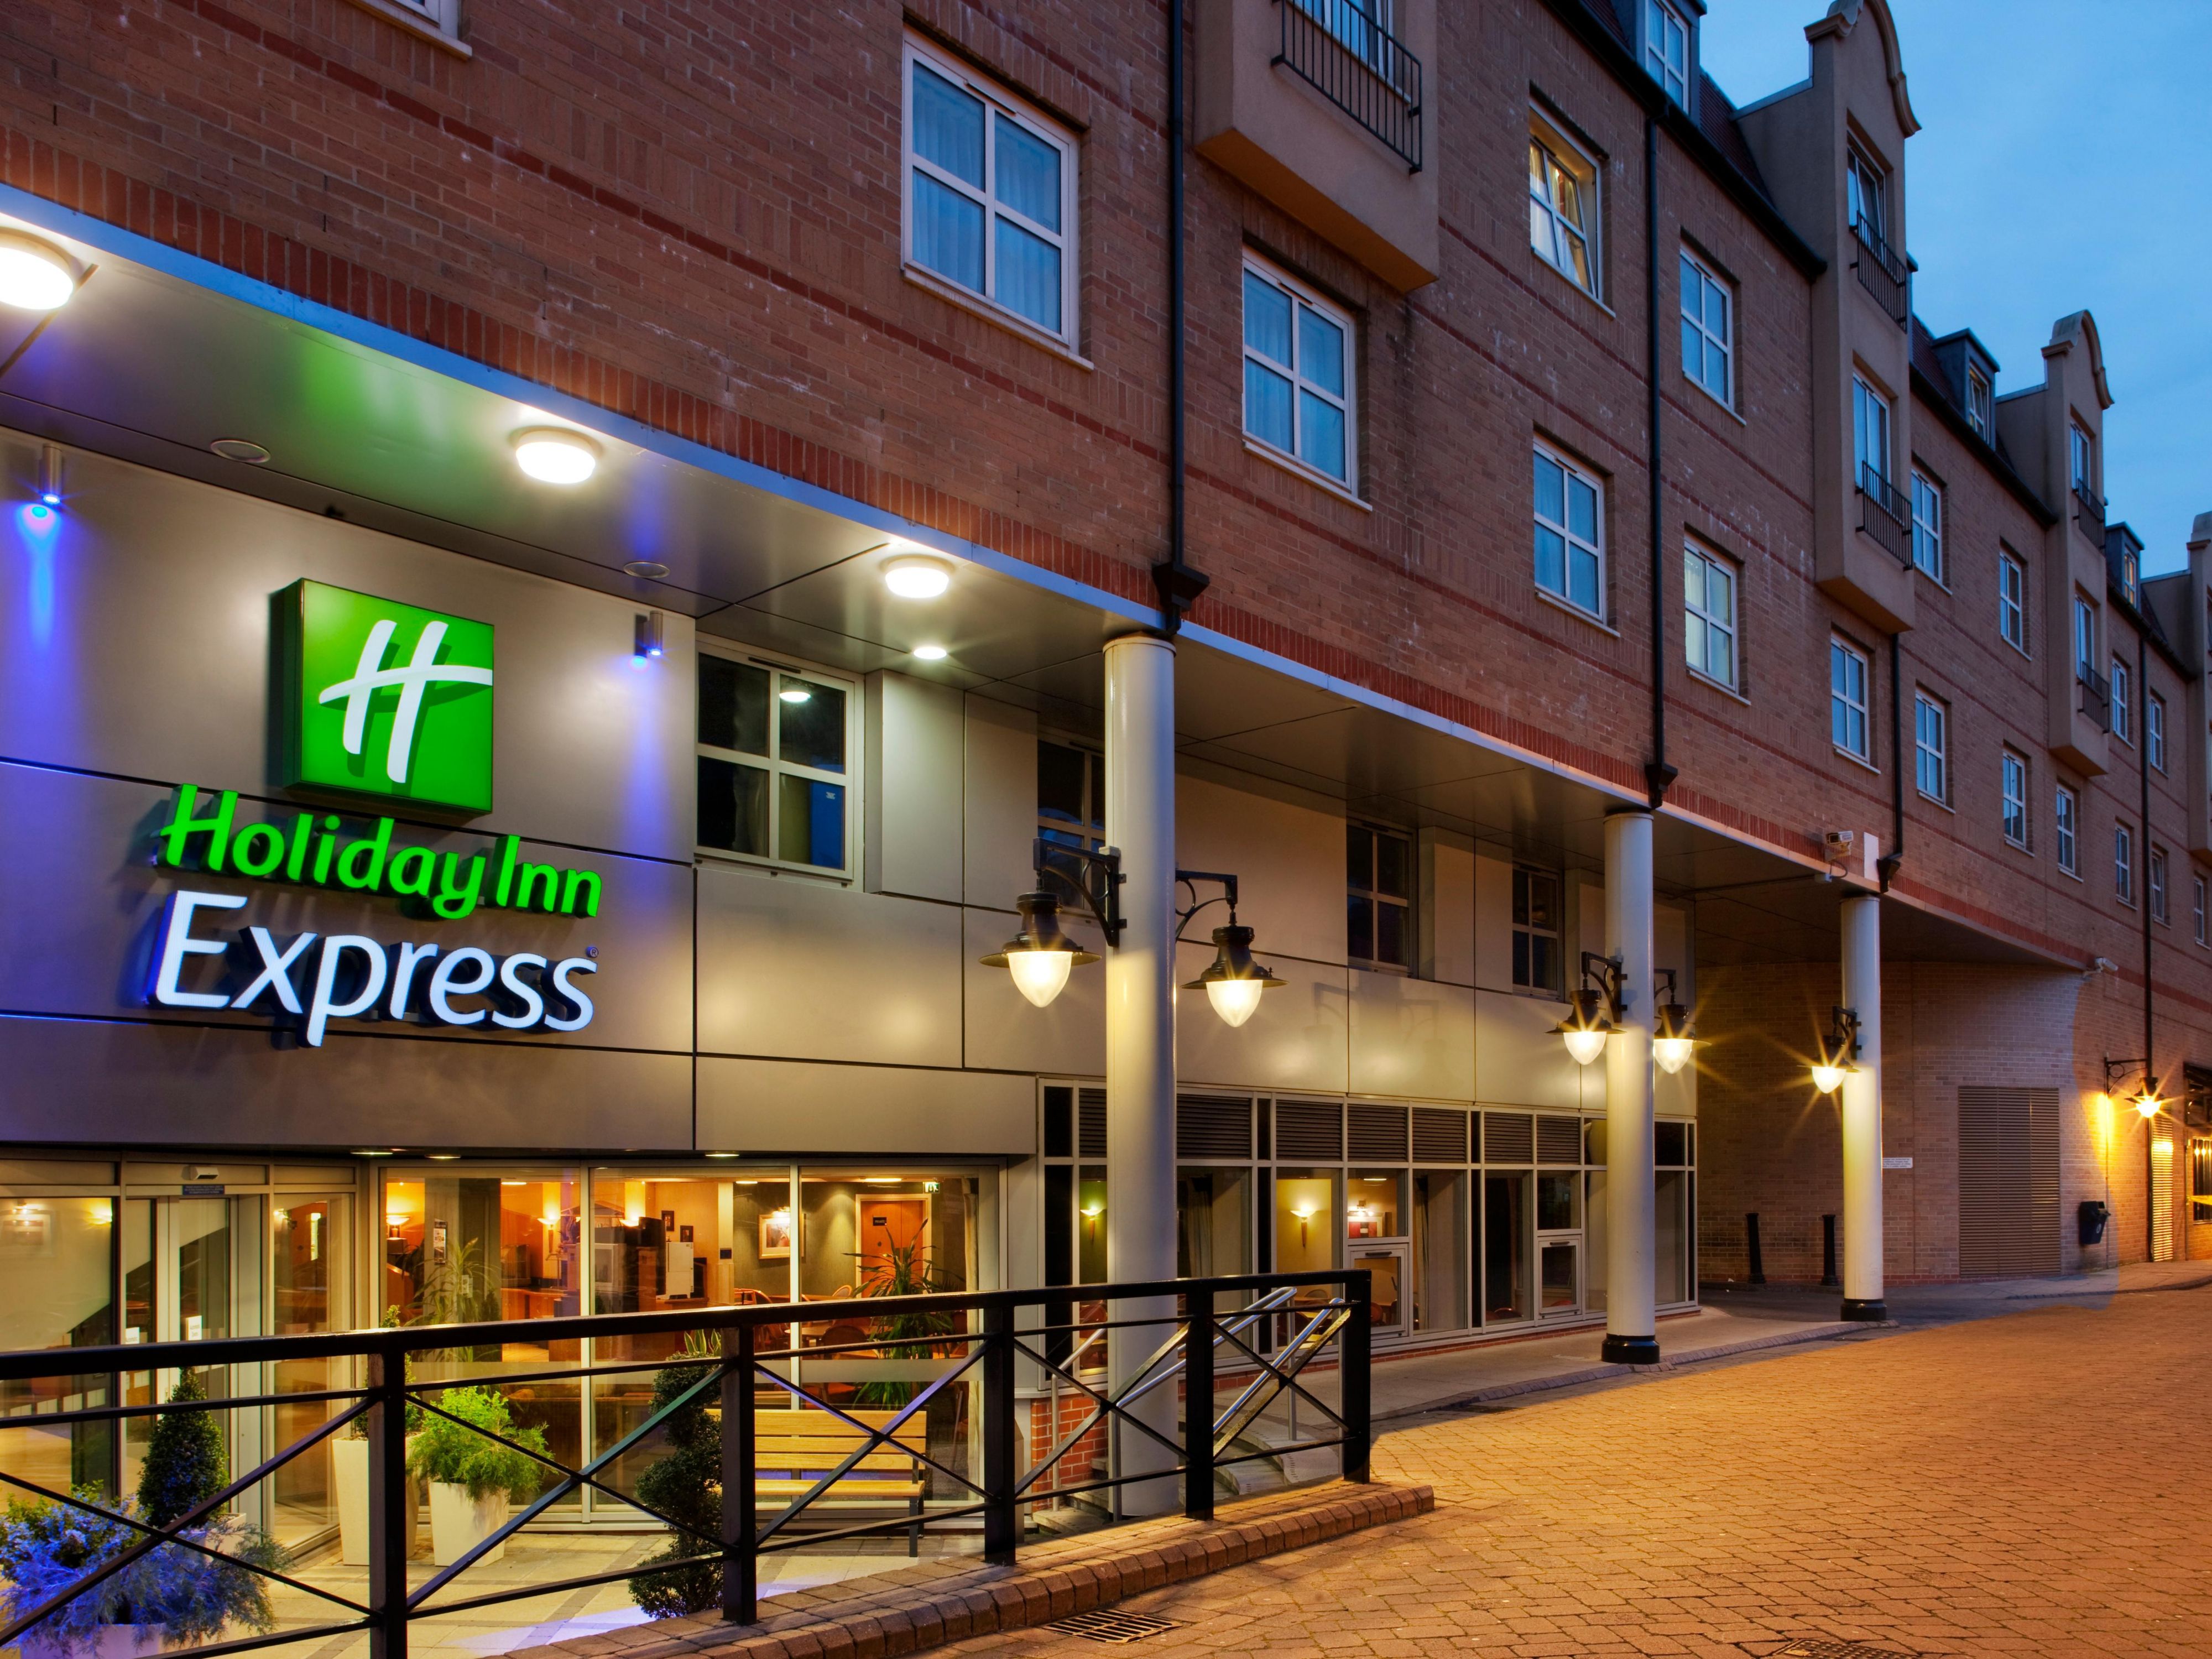 West London Hotels in Hammersmith | Holiday Inn Express London